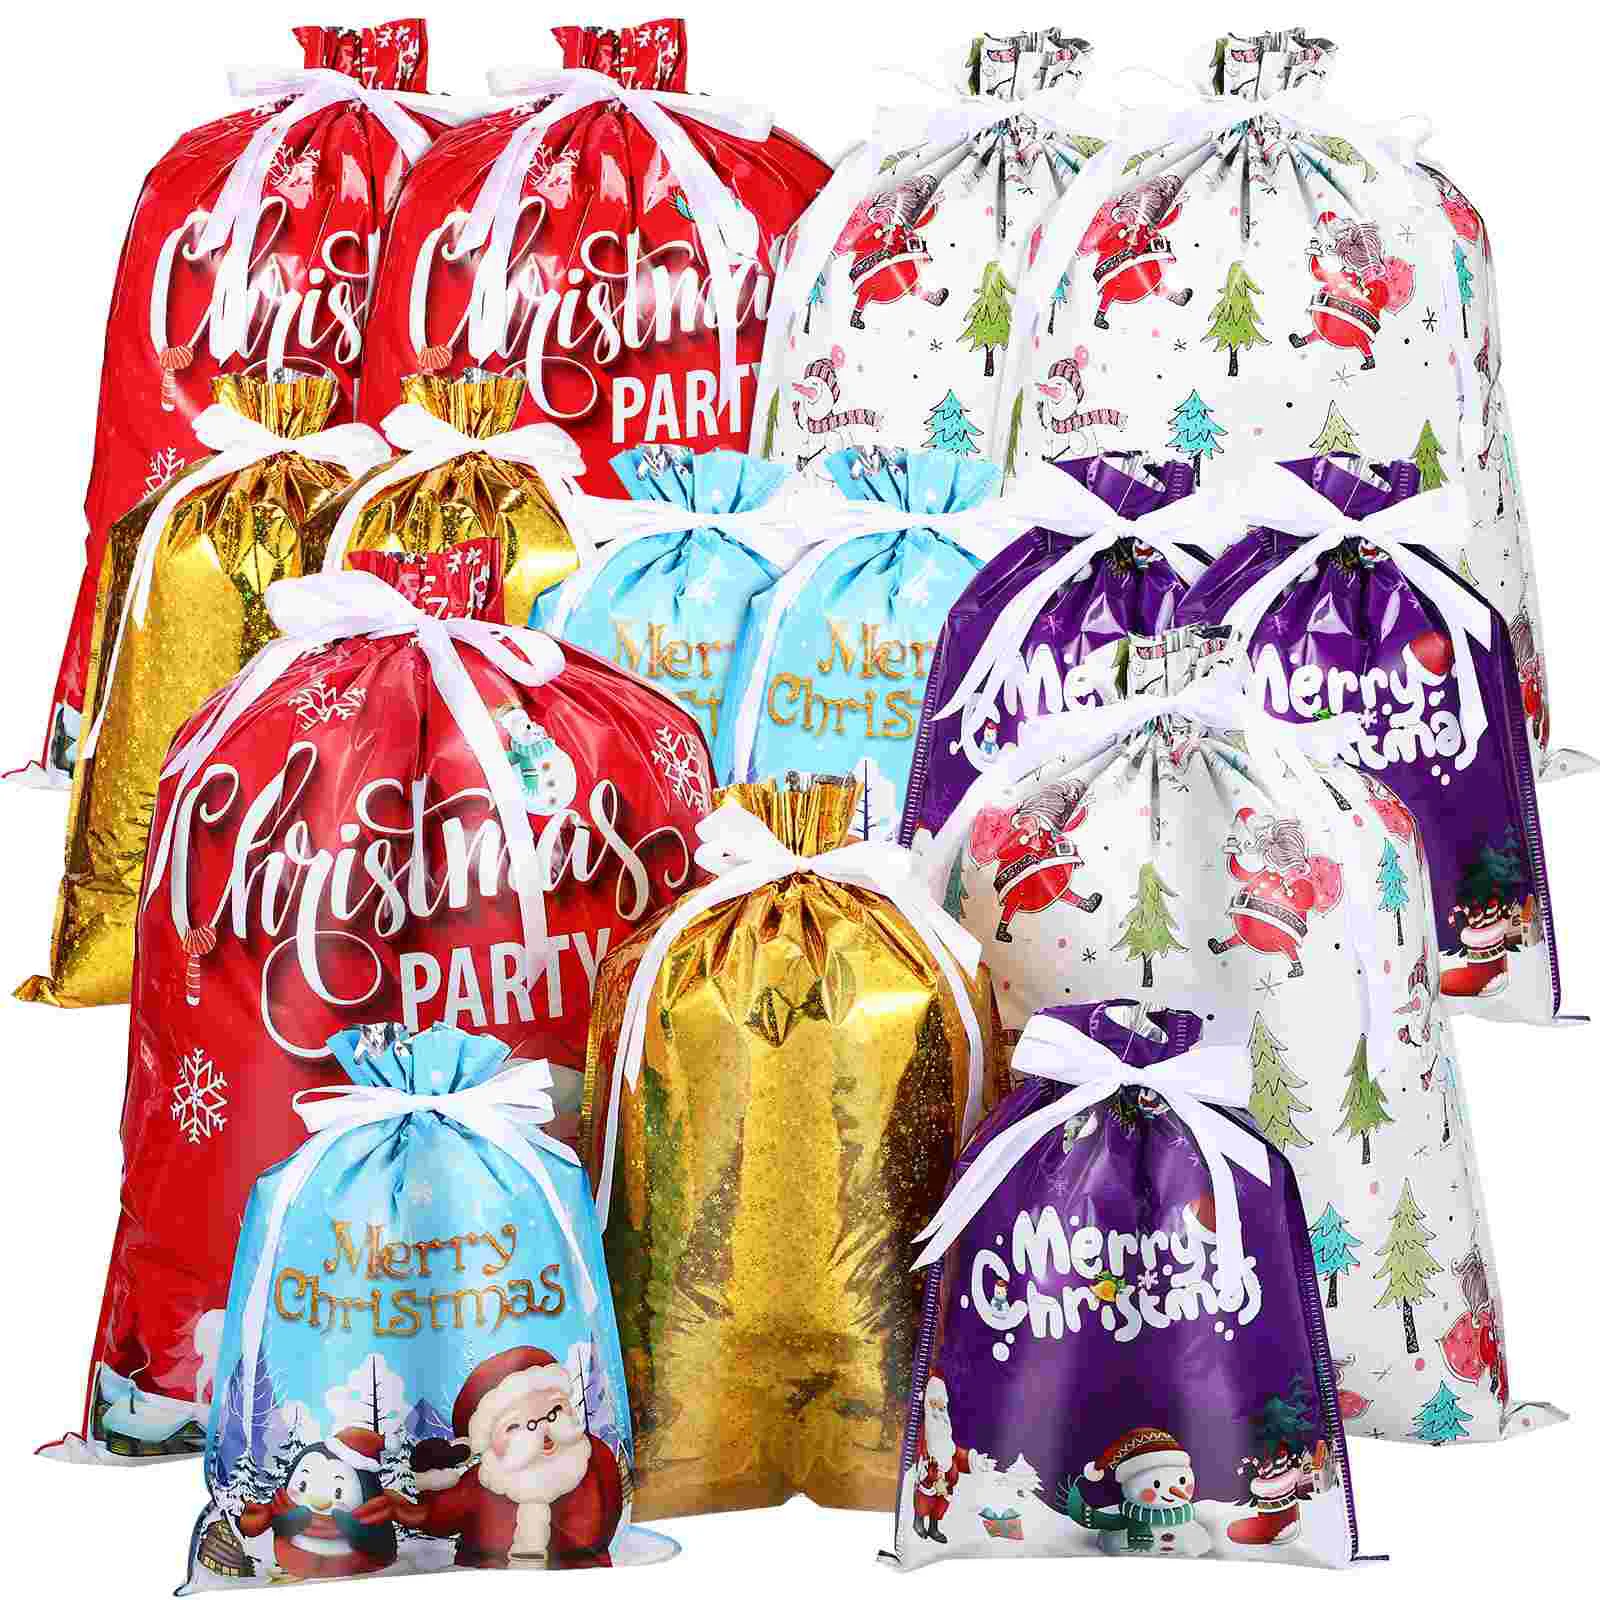 

15 Pcs Christmas Gift Bag Wrap Bags For Gifts Wrapping Treats Goodie Packing Favor